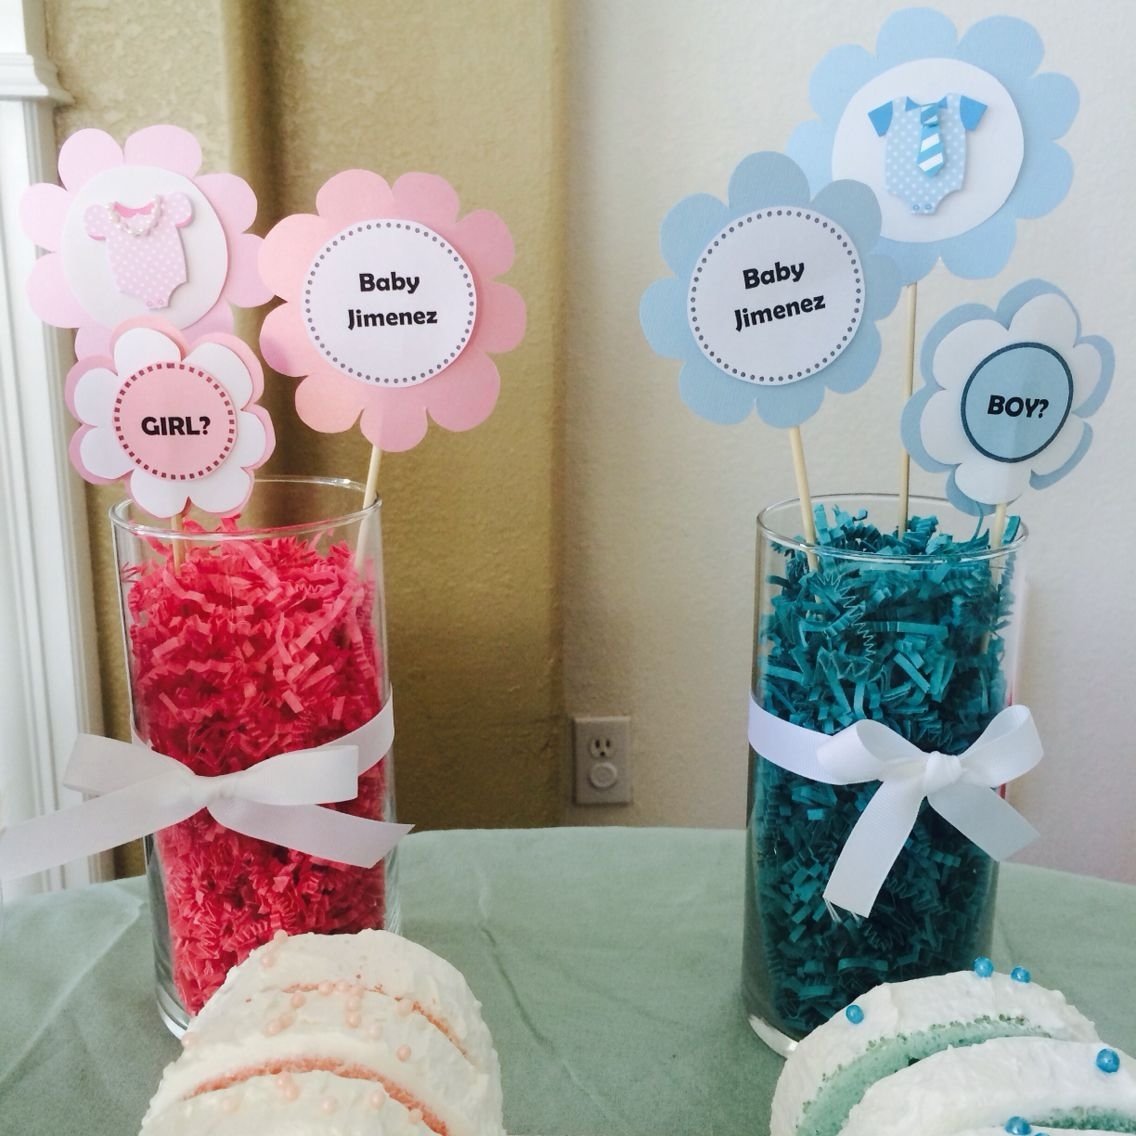 10 Most Popular Ideas For Gender Reveal Parties diy centerpieces for gender reveal party gender reveal party ideas 2 2022